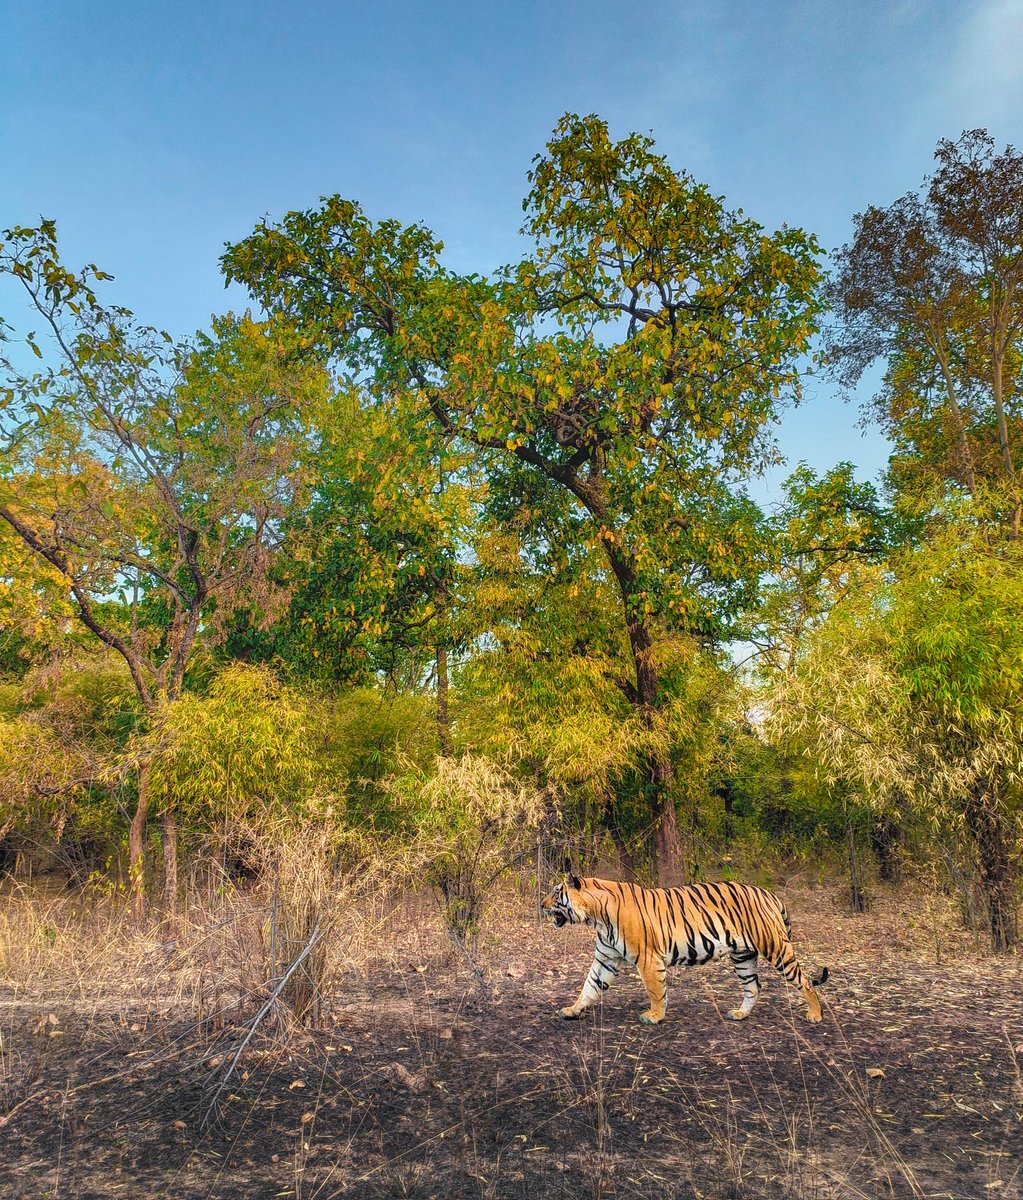 #Bandhavgarh Bamboo forest is the land of Tigers #natgeoindia